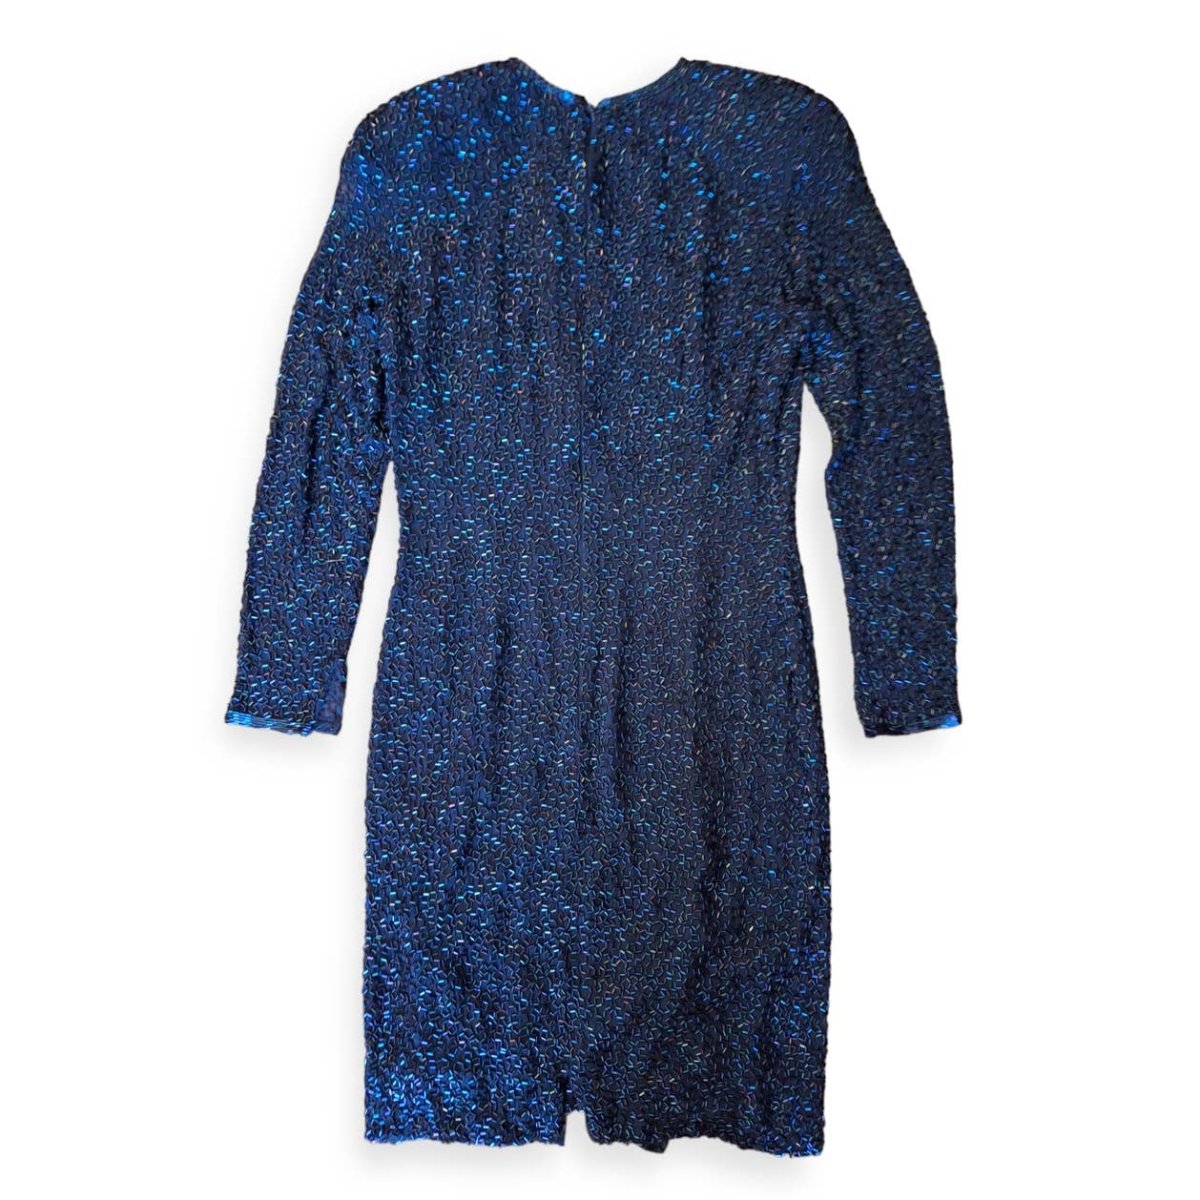 Vintage 80s Blue Silk Beaded Cocktail Dress Women's Size XS/S 2/4 - themallvintage The Mall Vintage